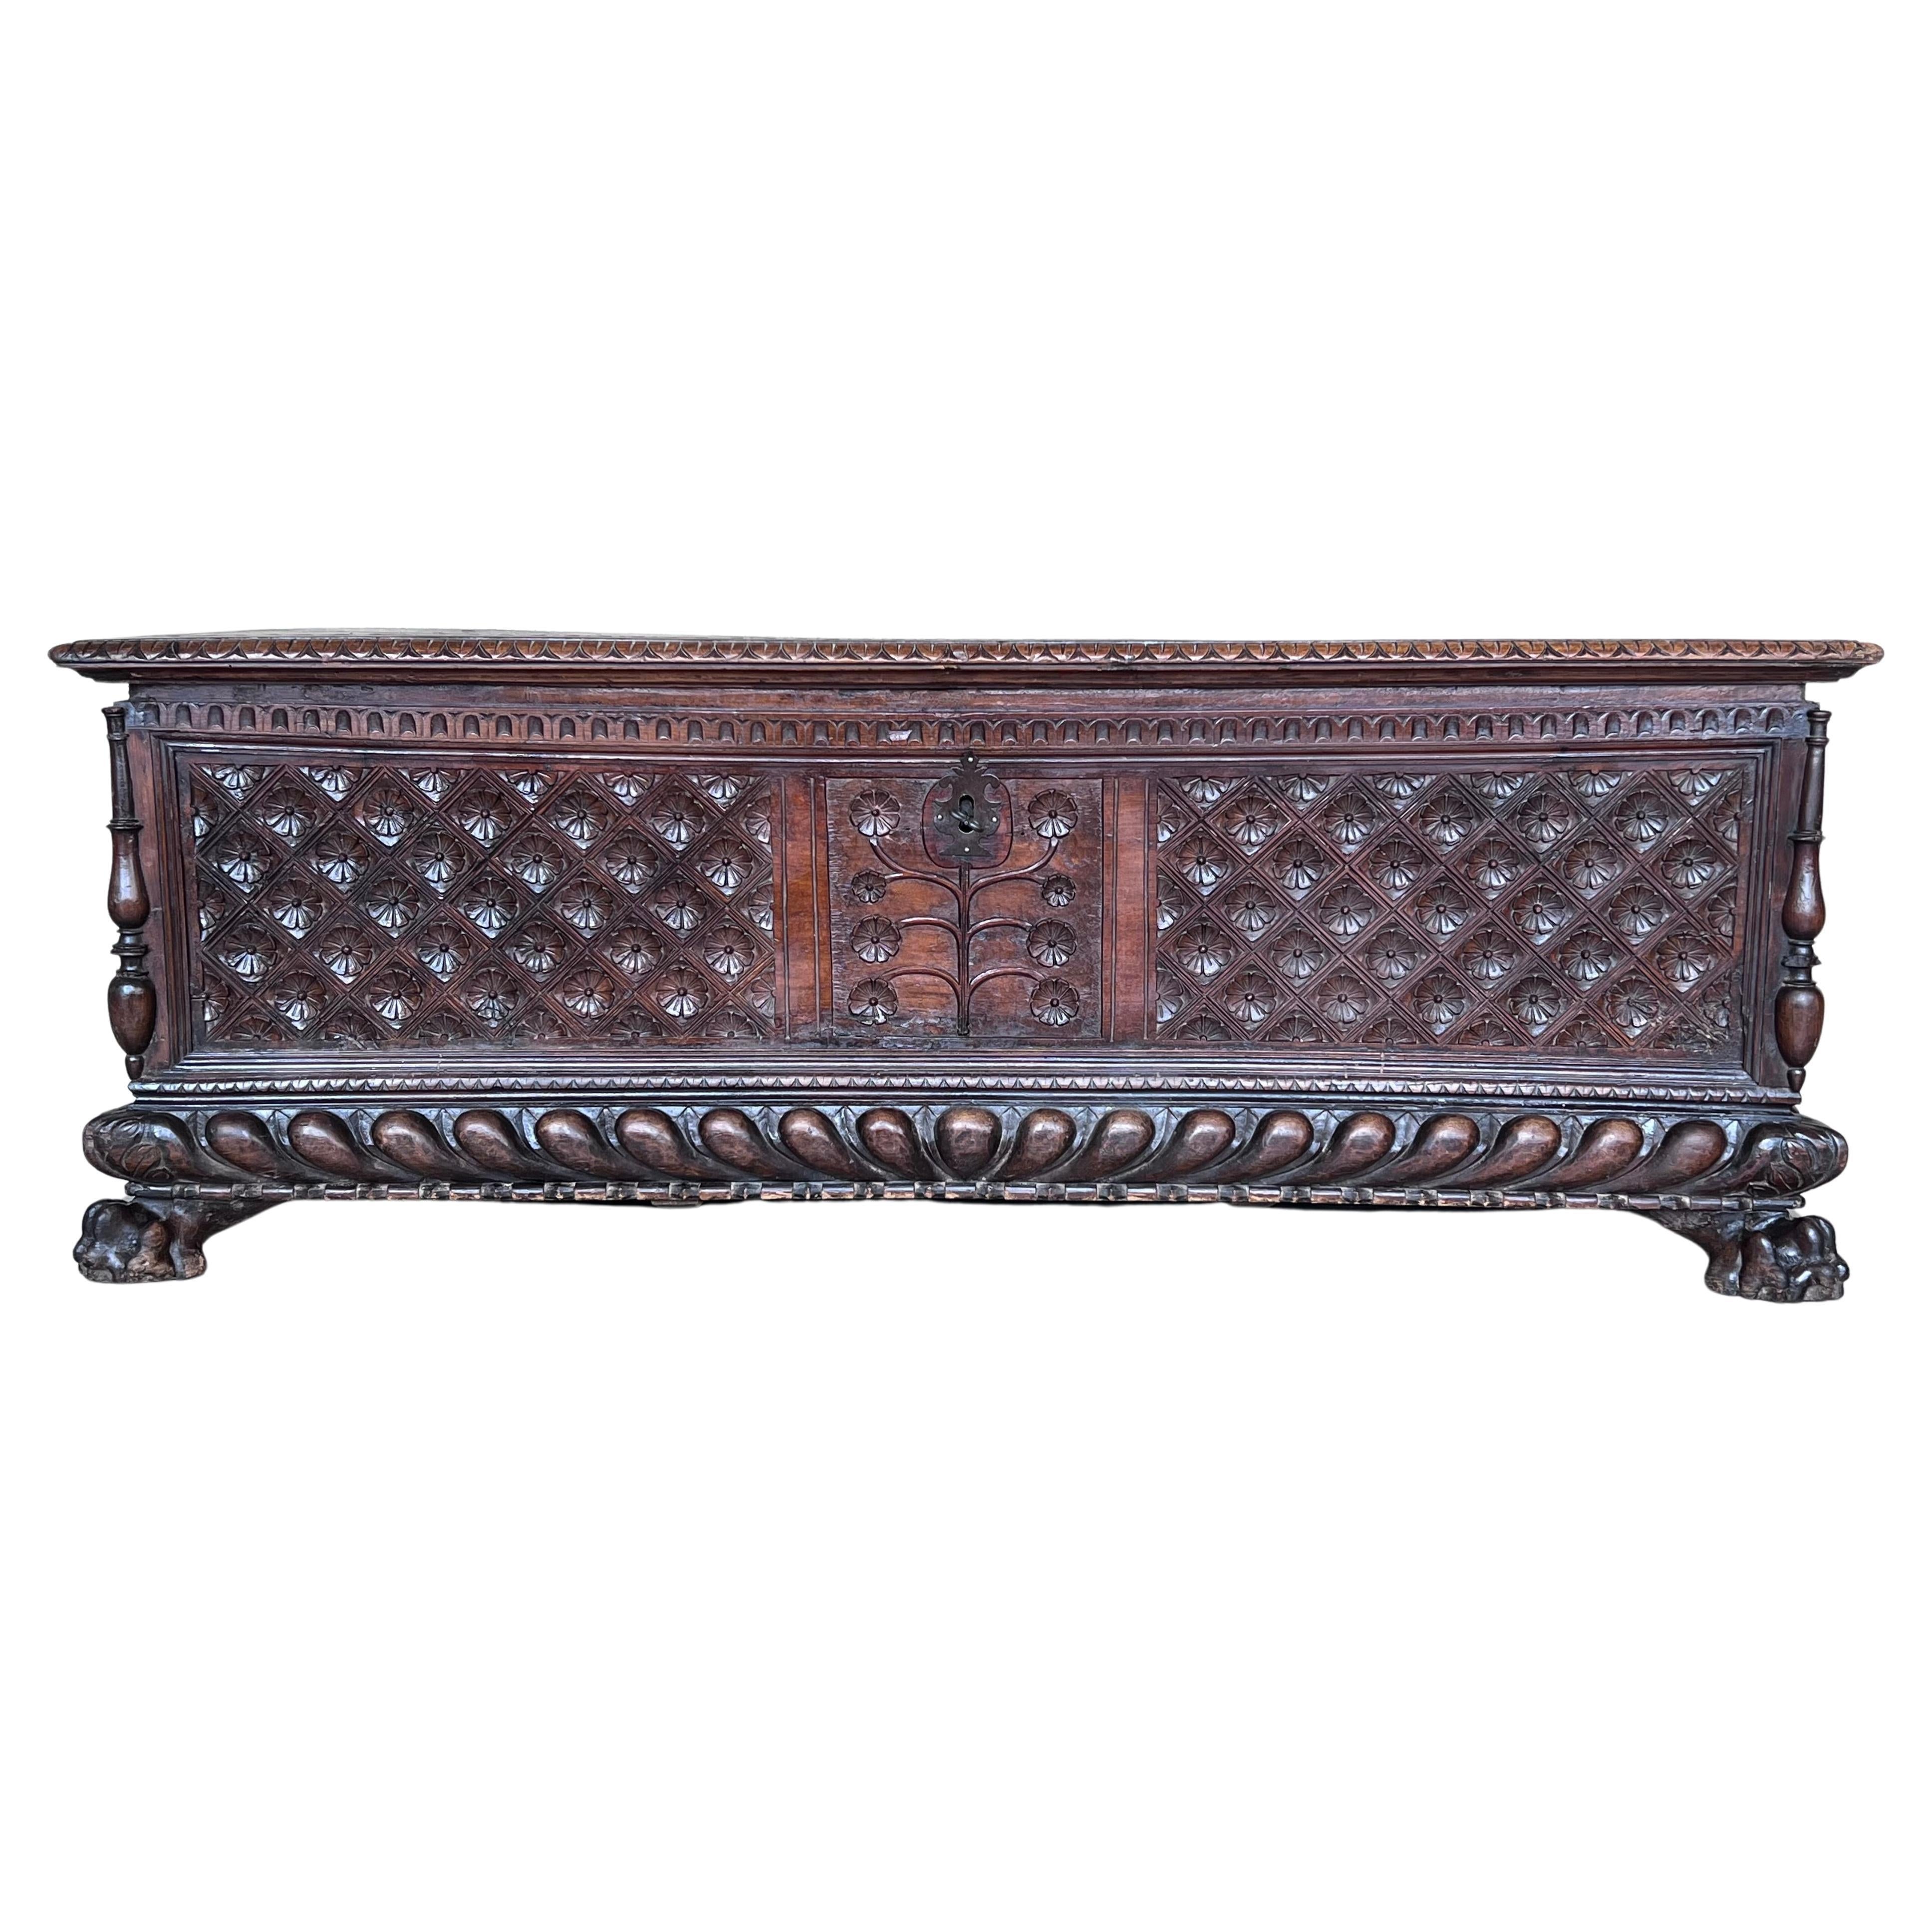 17th Century Italian Carved Cassone Trunk with Original Hardware For Sale